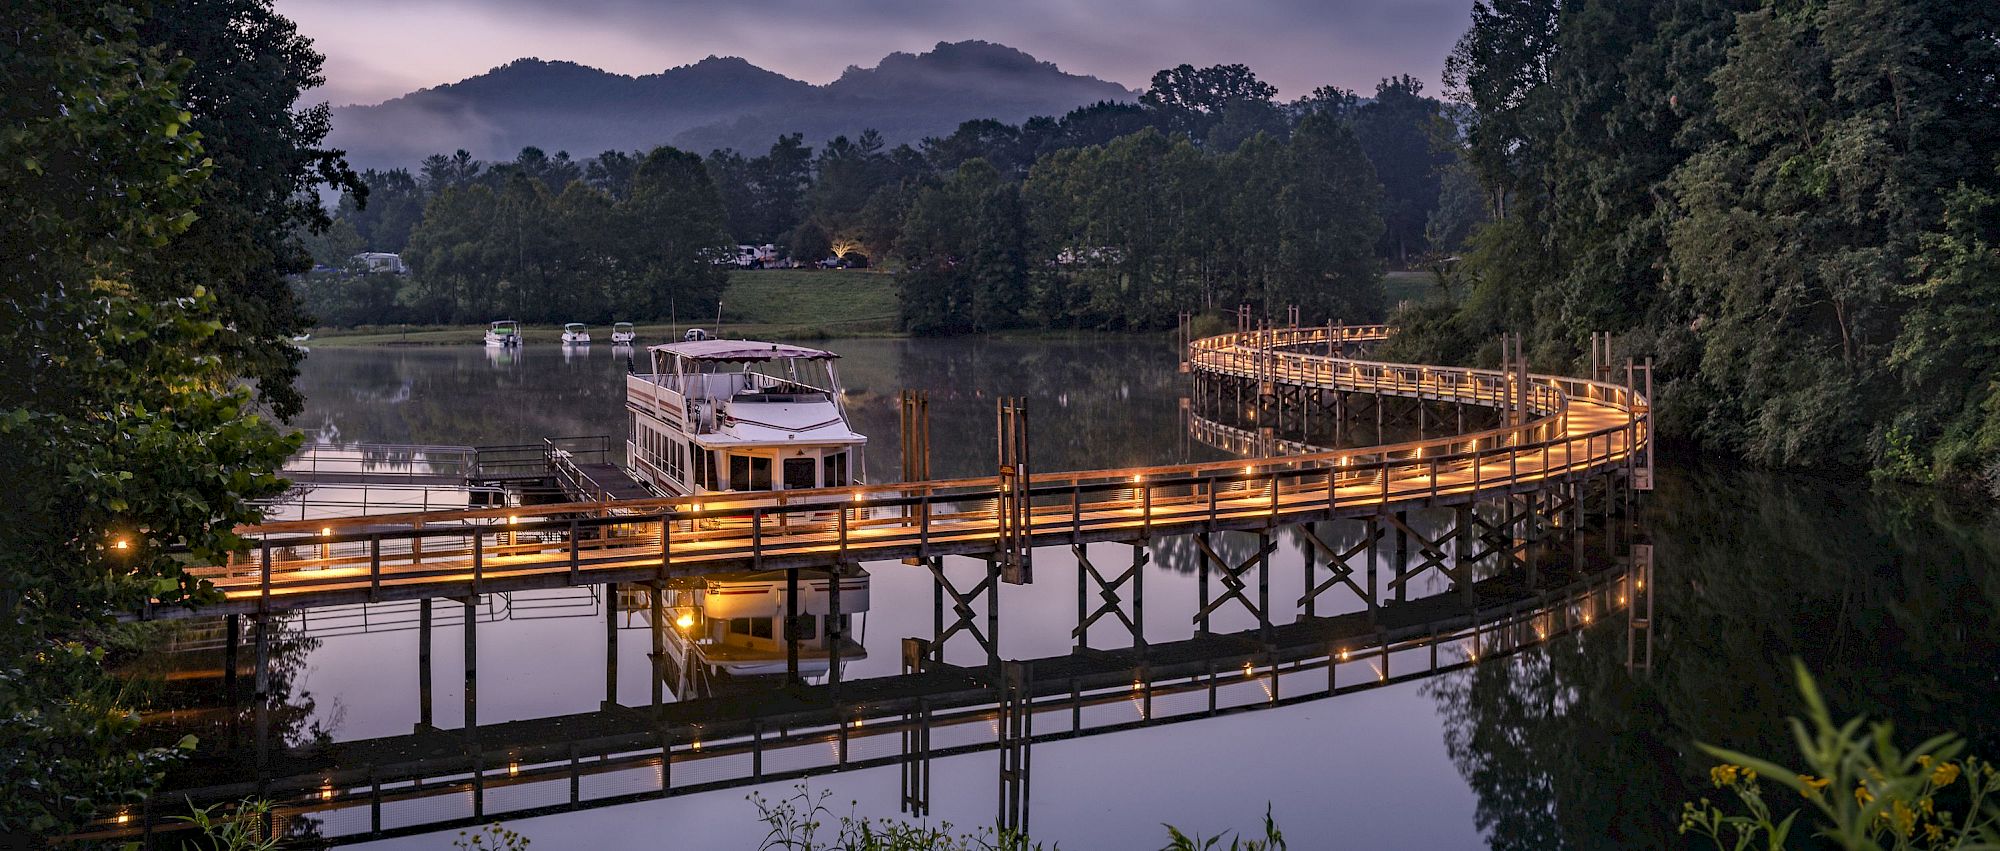 A boat on a serene lake is connected to a beautifully lit, curved wooden bridge, surrounded by lush greenery and distant mountains, ending the sentence.